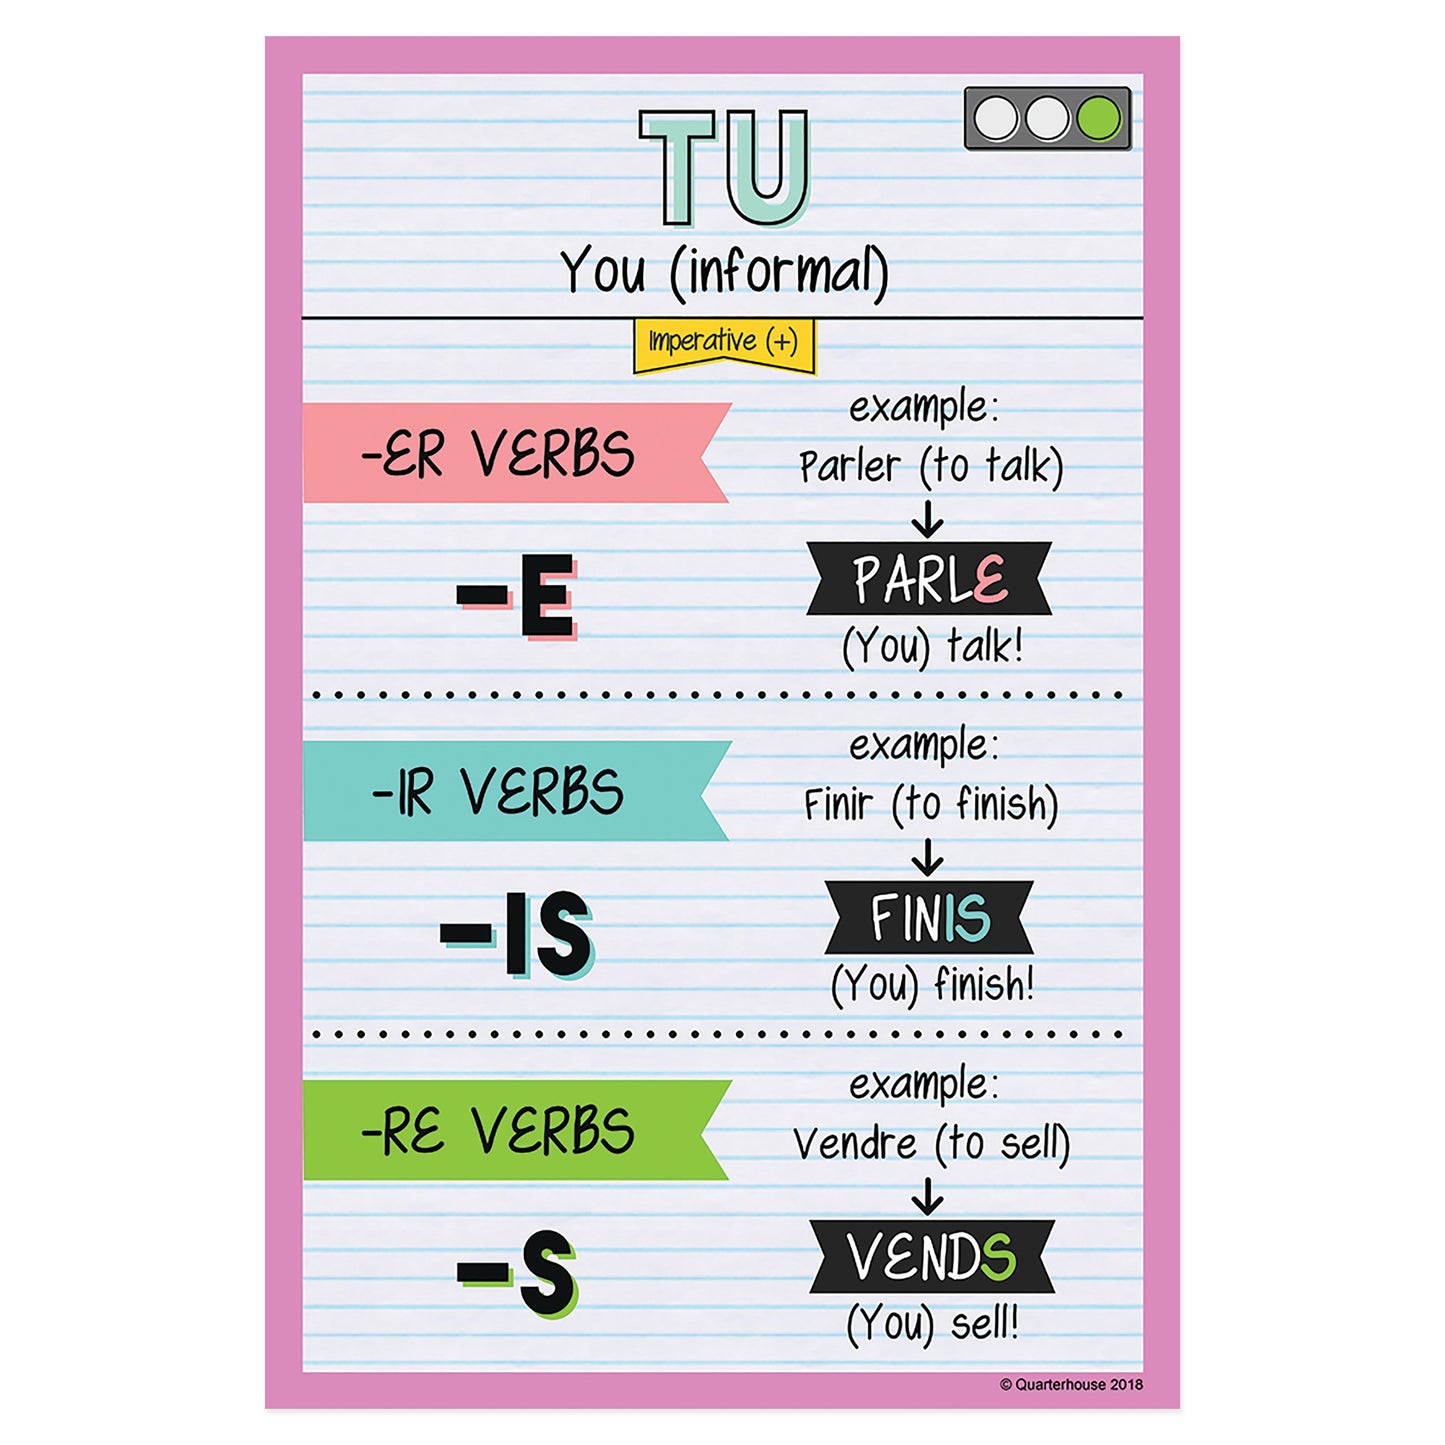 Quarterhouse Tu - Imerative Tense French Verb Conjugation Poster, French and ESL Classroom Materials for Teachers